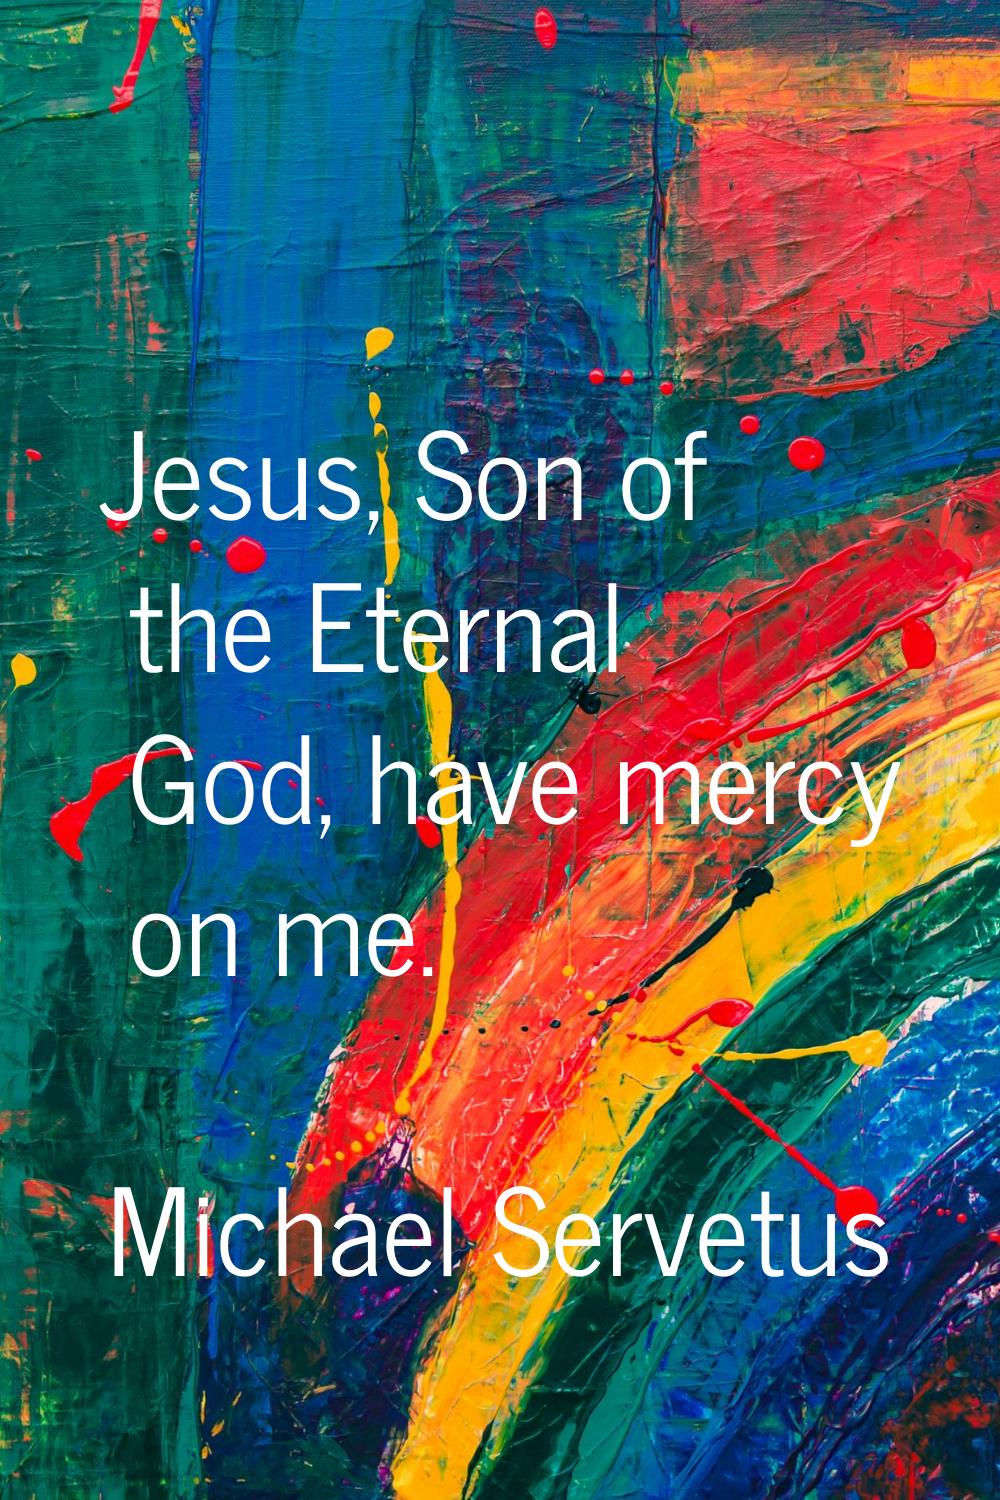 Jesus, Son of the Eternal God, have mercy on me.